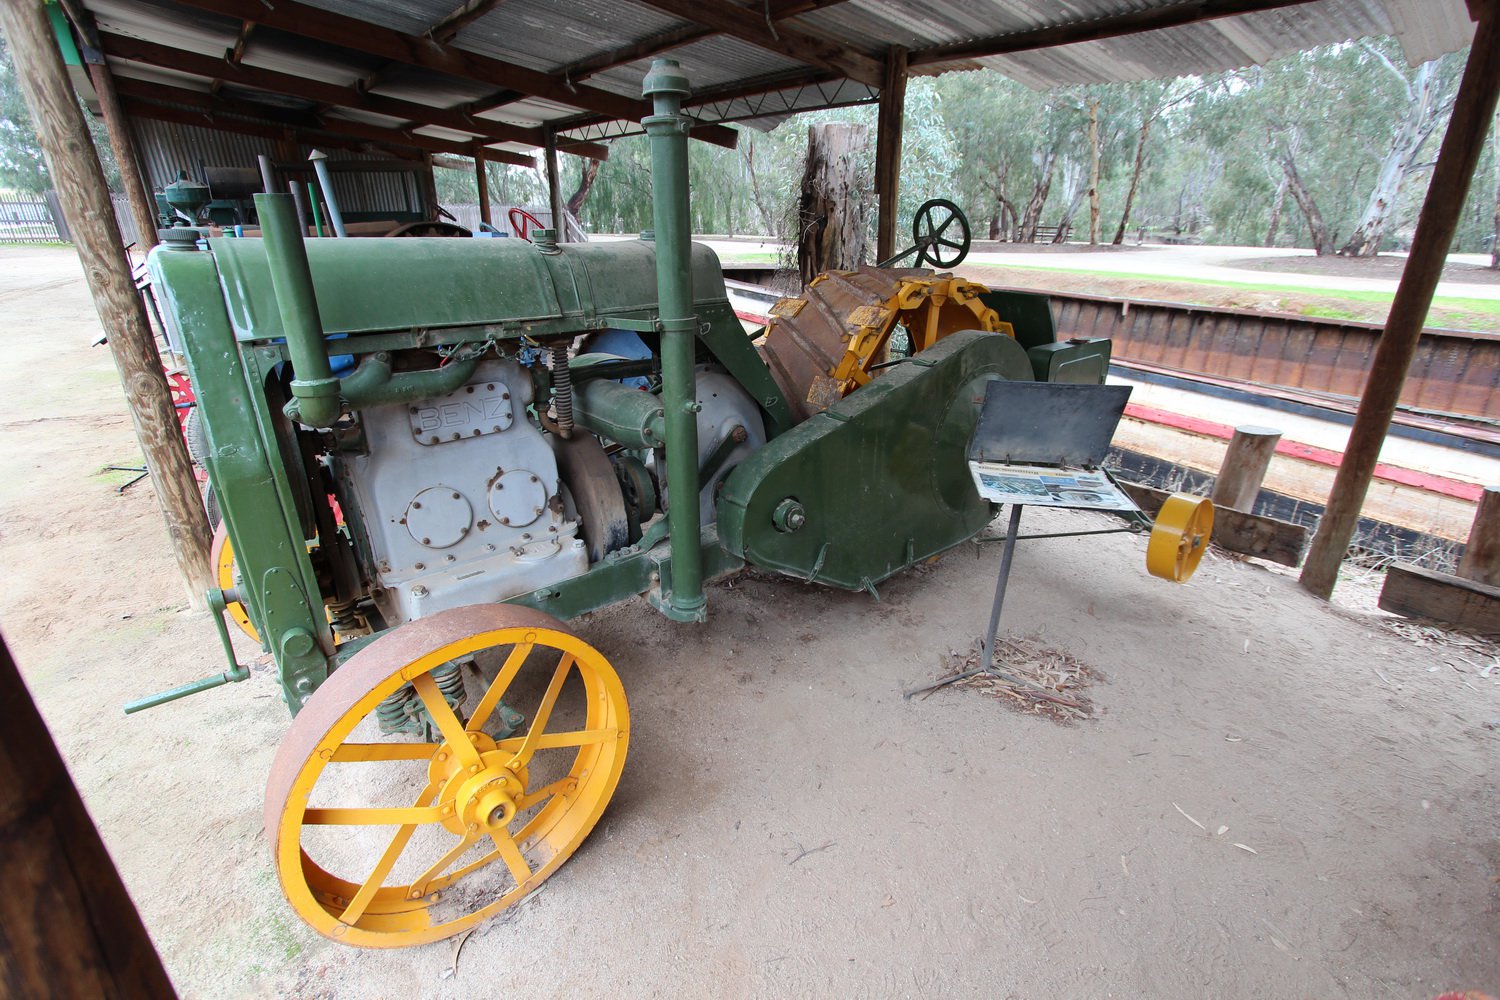 Benz Sendling tractor. Tractor and machinery display, Pioneer Settlement Swan Hill. North West Victoria Tour, July 2020.